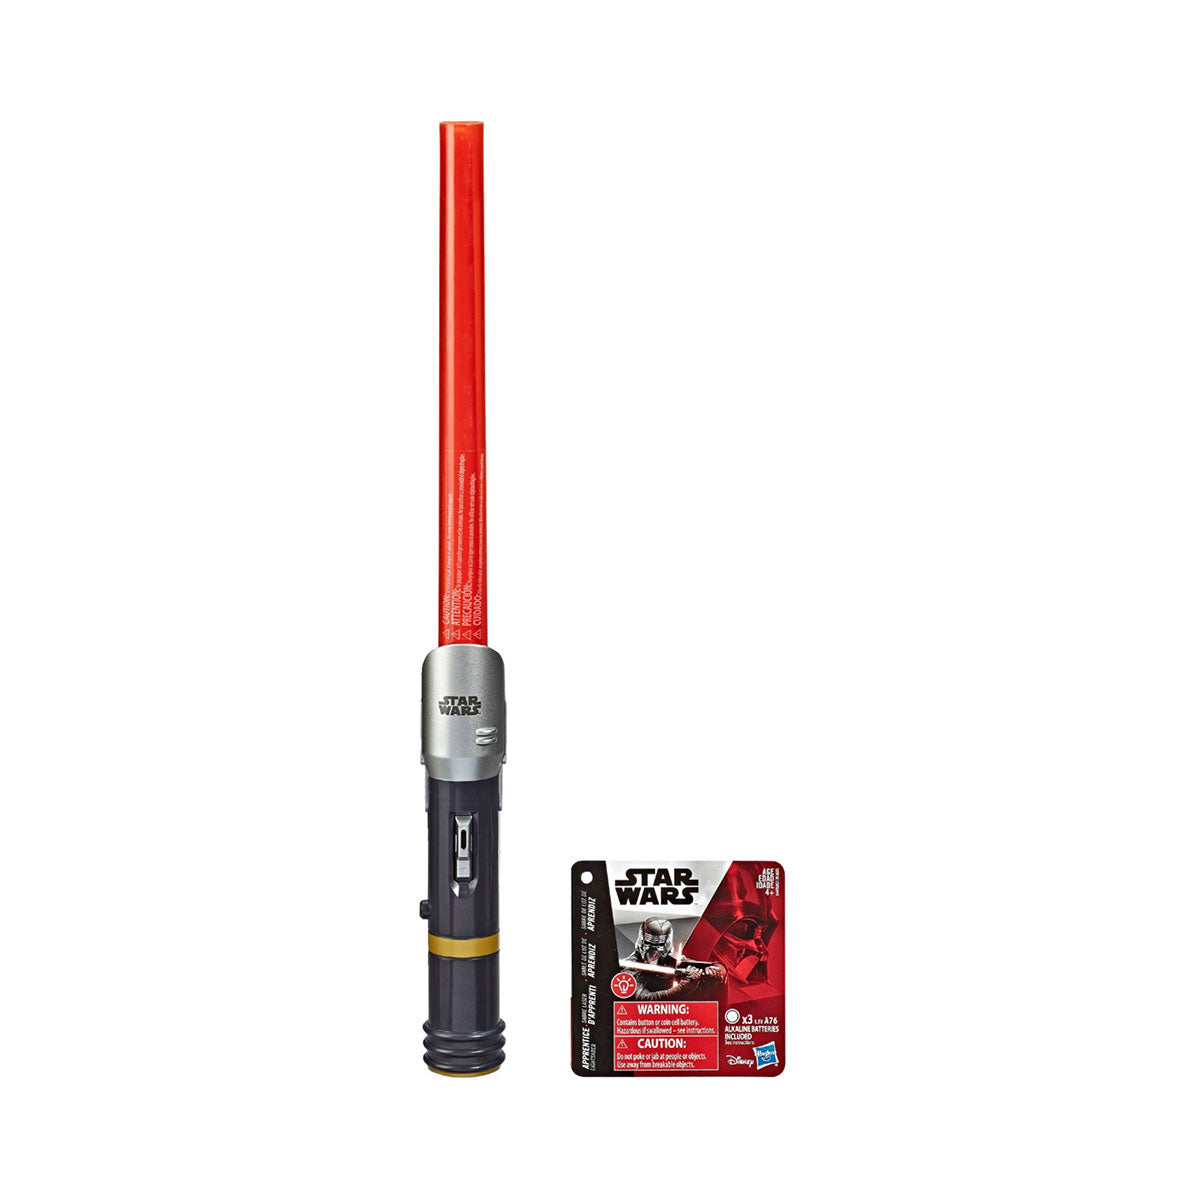 Star Wars - Academy Level 1 Lightsaber (Styles Vary - One Supplied)